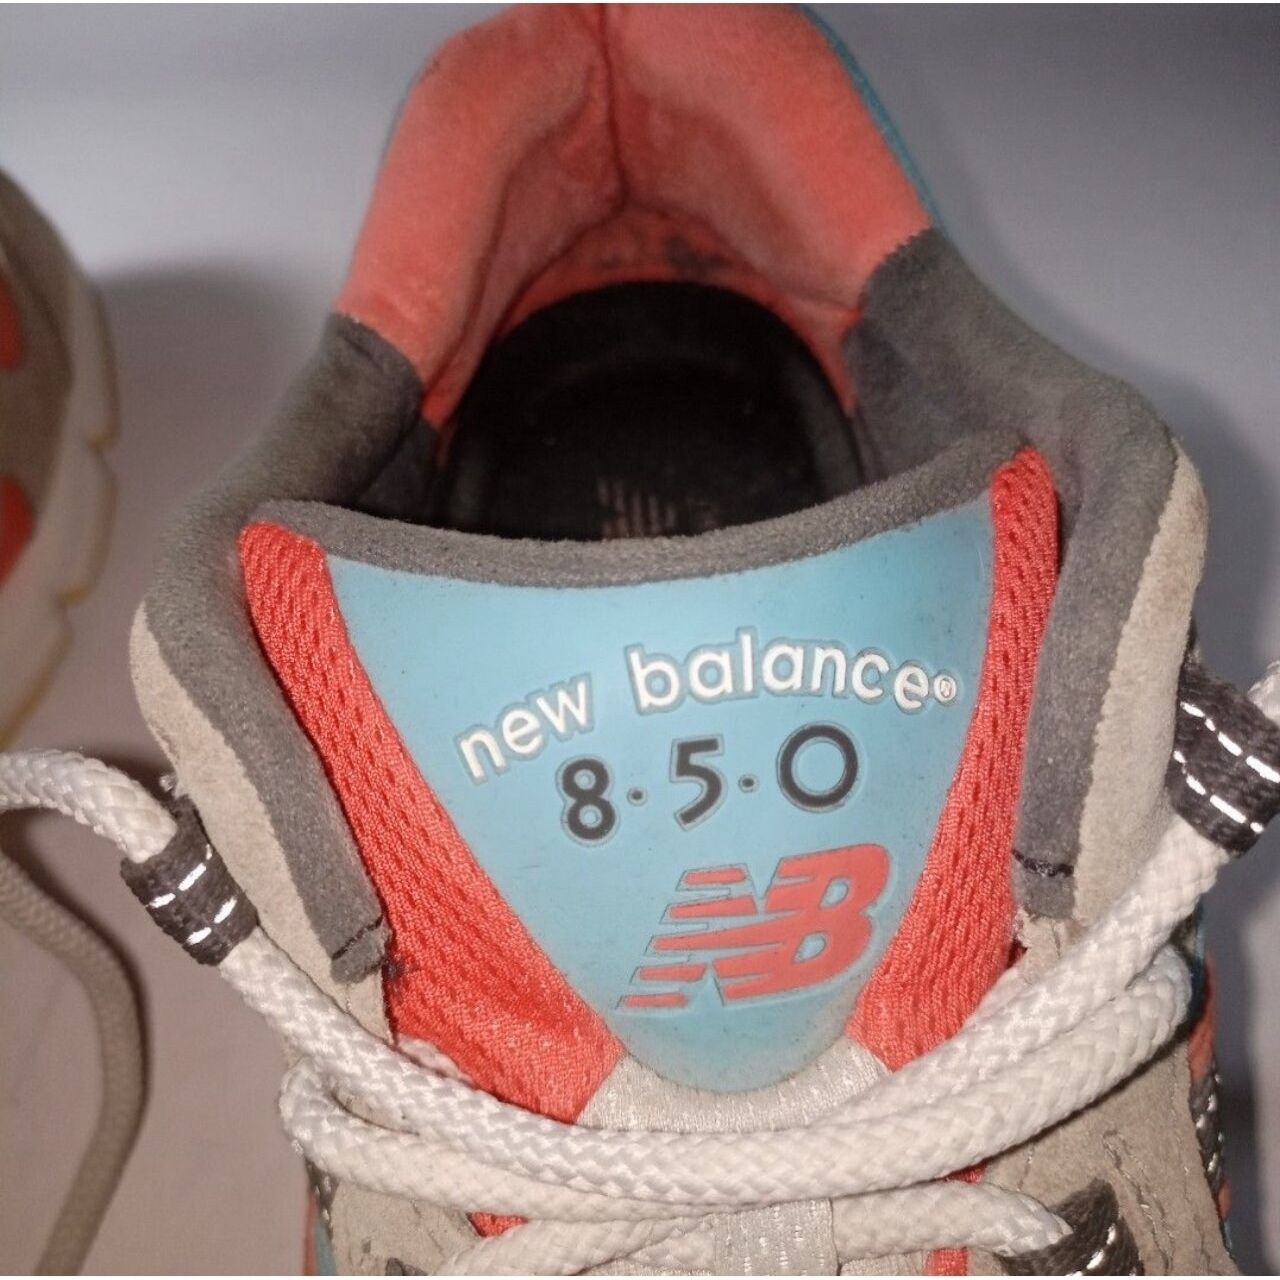 New Balance 8.5.0 Sneakers